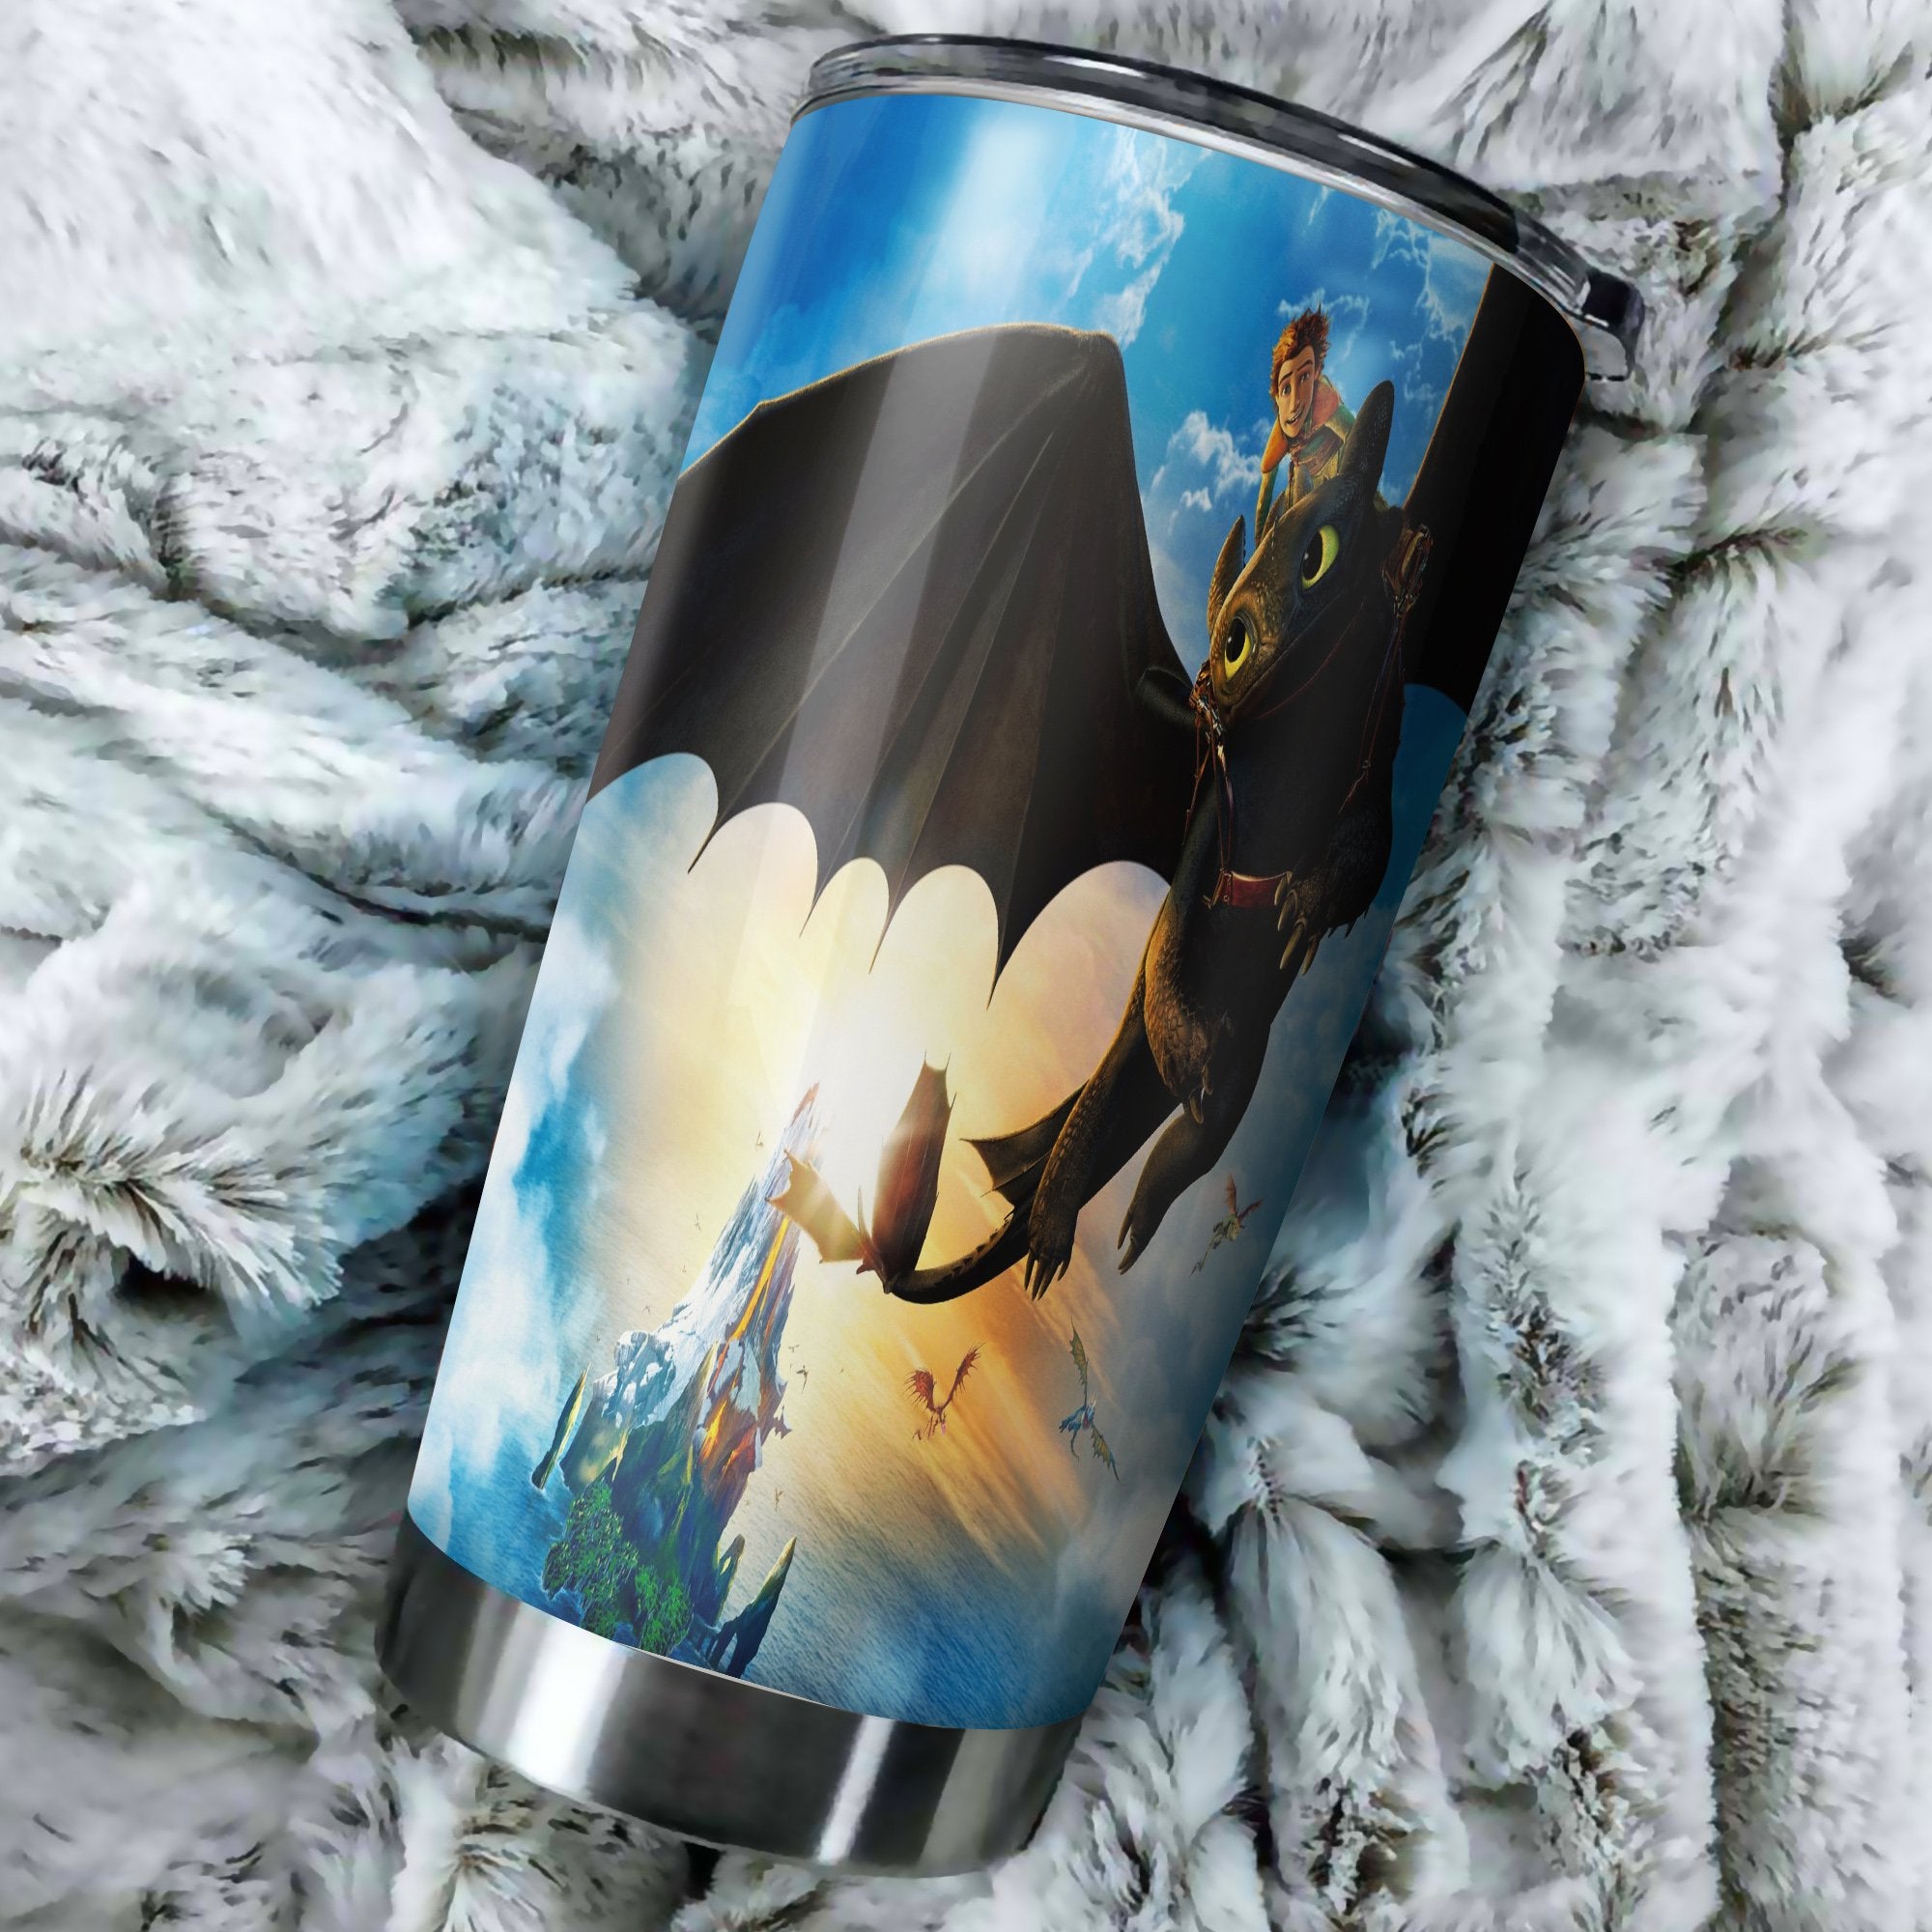 How To Train Your Dragon Dawn Tumbler Perfect Birthday Best Gift Stainless Traveling Mugs 2021